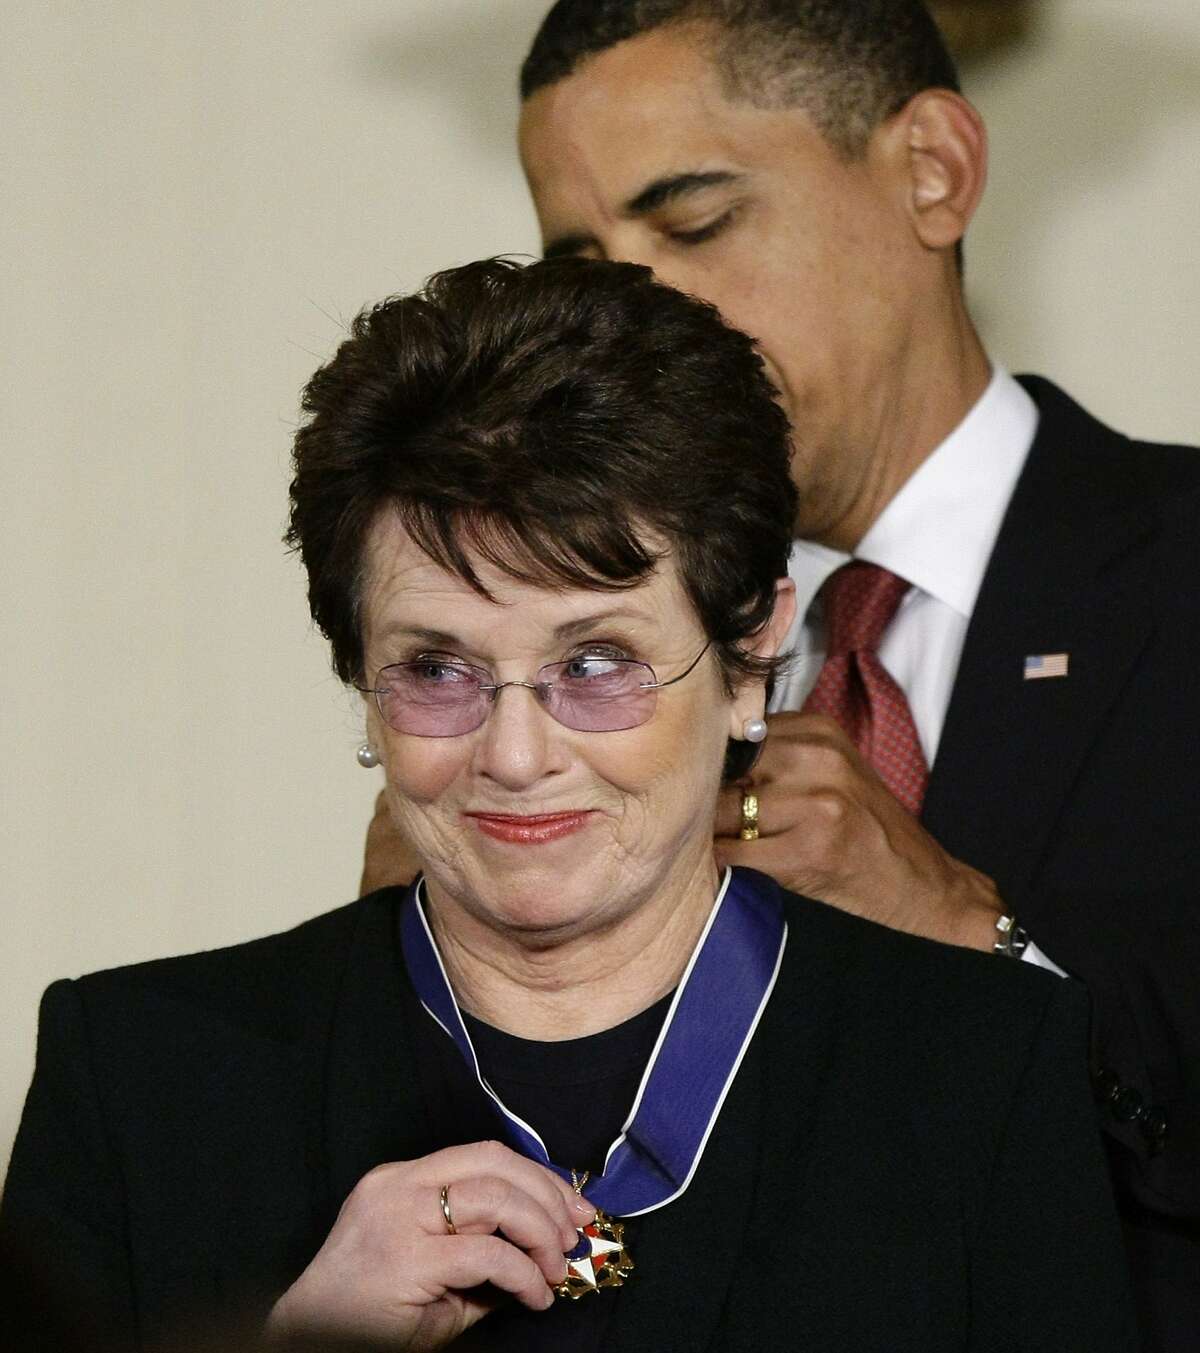 FILE - In this Aug. 12, 2009 file photo, President Barack Obama presents the 2009 Presidential Medal of Freedom to Billie Jean King, known for winning the famous "Battle of the Sexes" tennis match, and championing gender equality issues, during ceremonies at the White House in Washington. King believes standing up to discrimination is the best way to combat it. She will help lead the U.S. delegation in the opening ceremonies at the Sochi Olympics in Russia, which recently passed an anti-gay law. (AP Photo/J. Scott Applewhite, File)